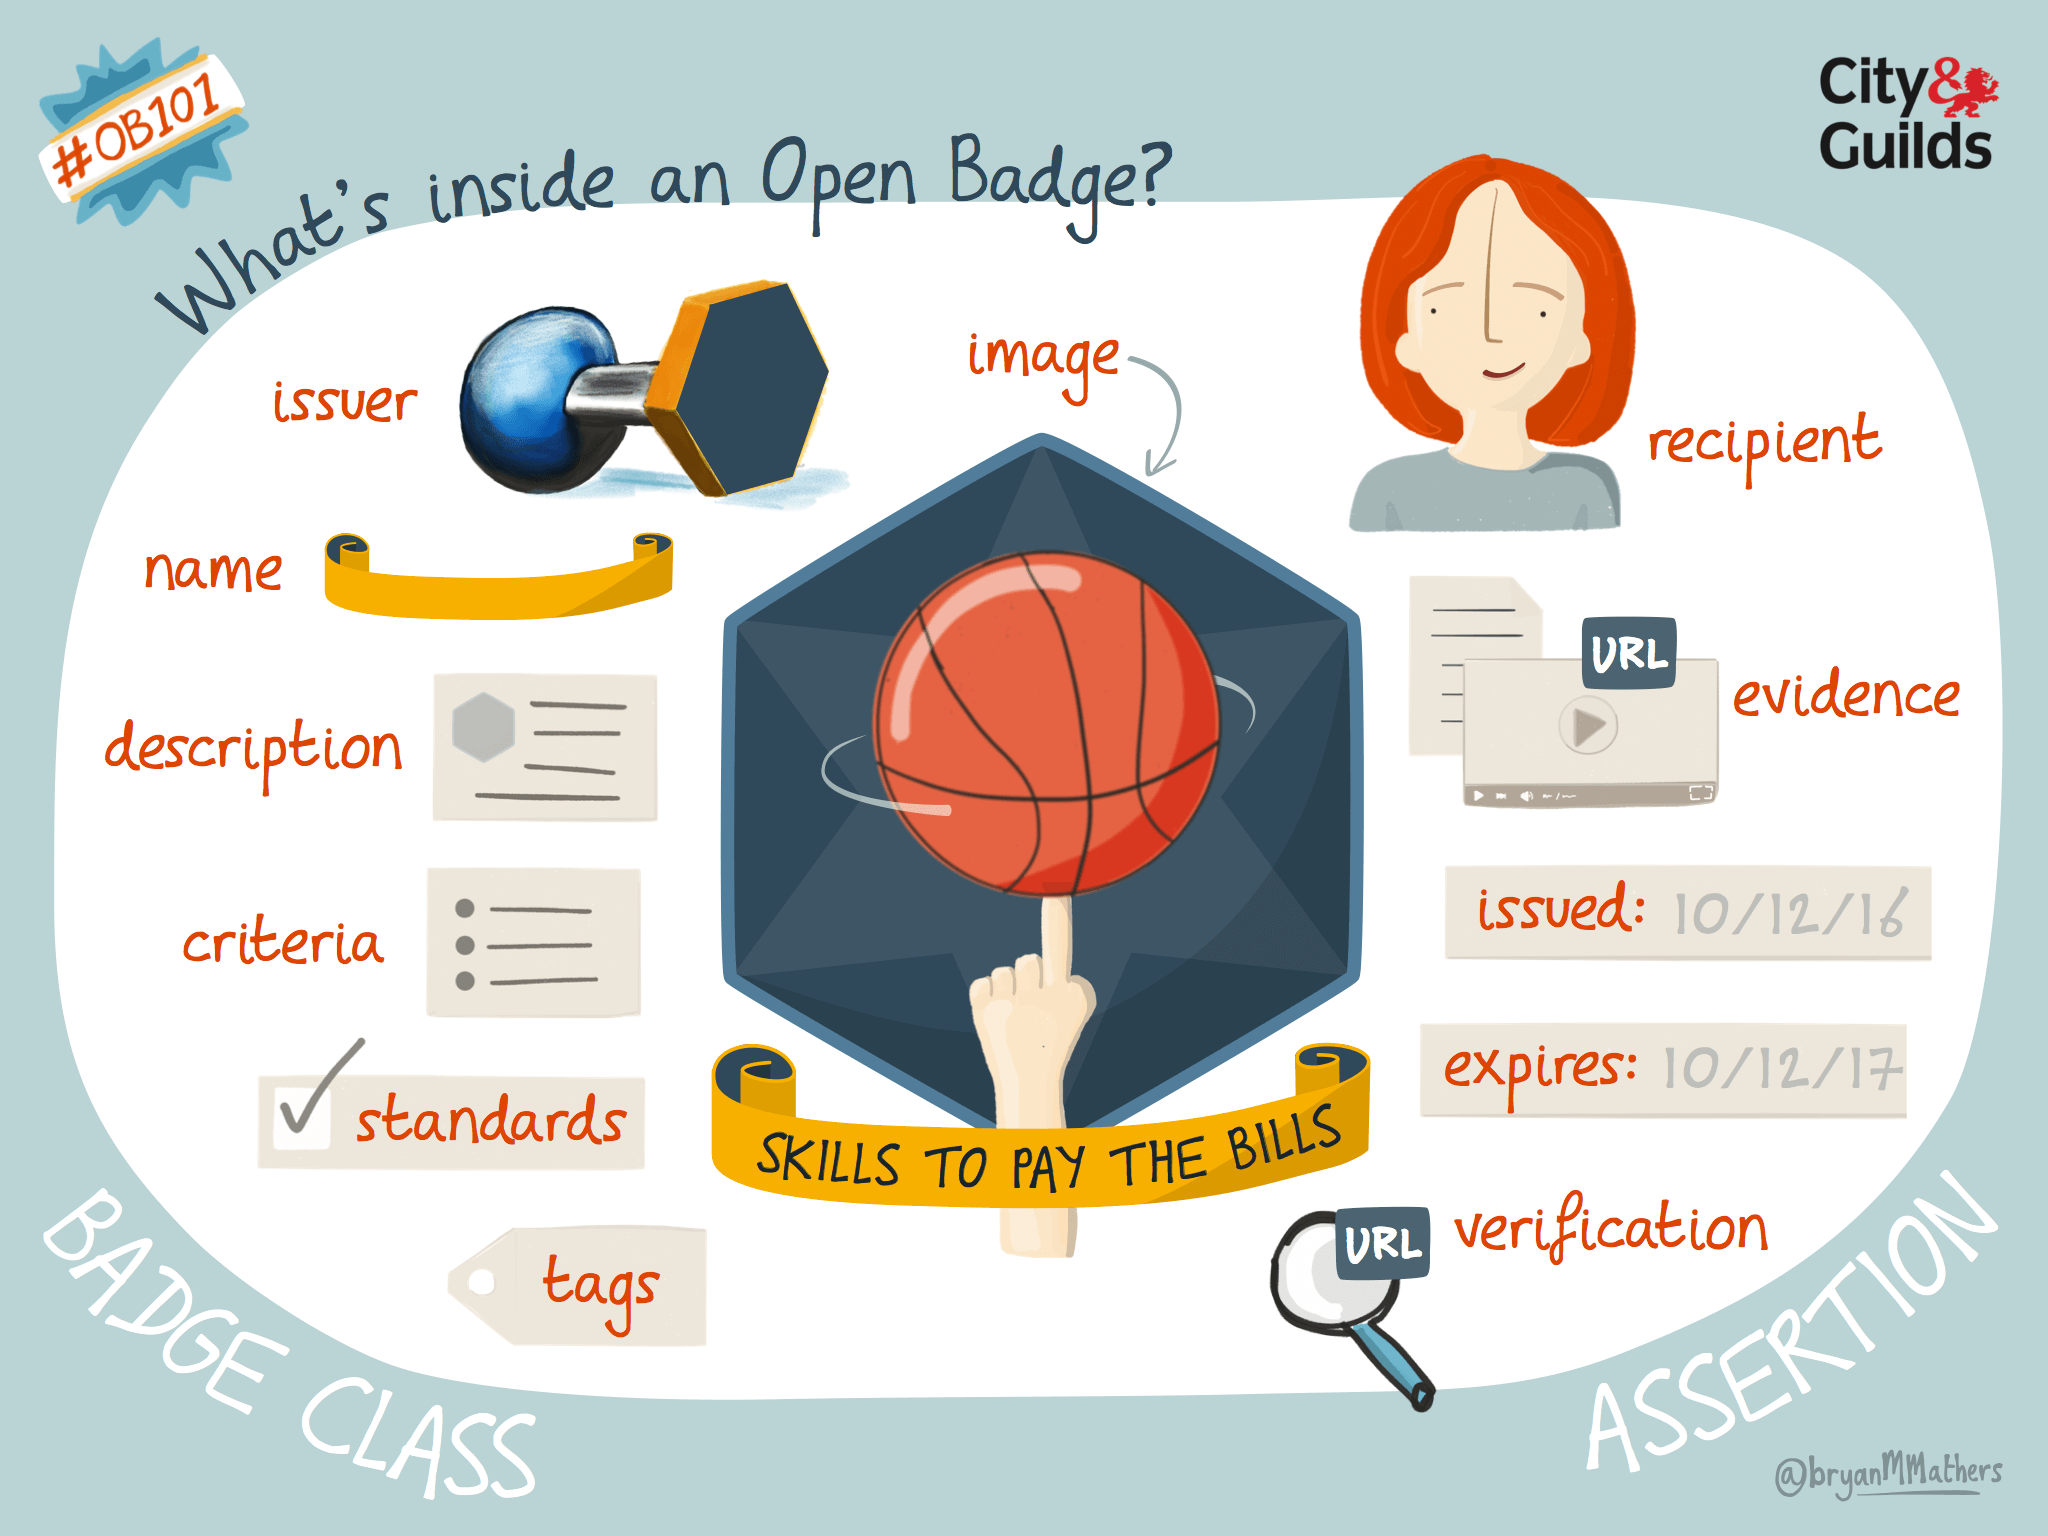 Open digital badges have certifiable metadata locked inside. What’s inside an open badge? by Visual Thinkery is licenced under CC-BY-ND for the City and Guilds of London Institute